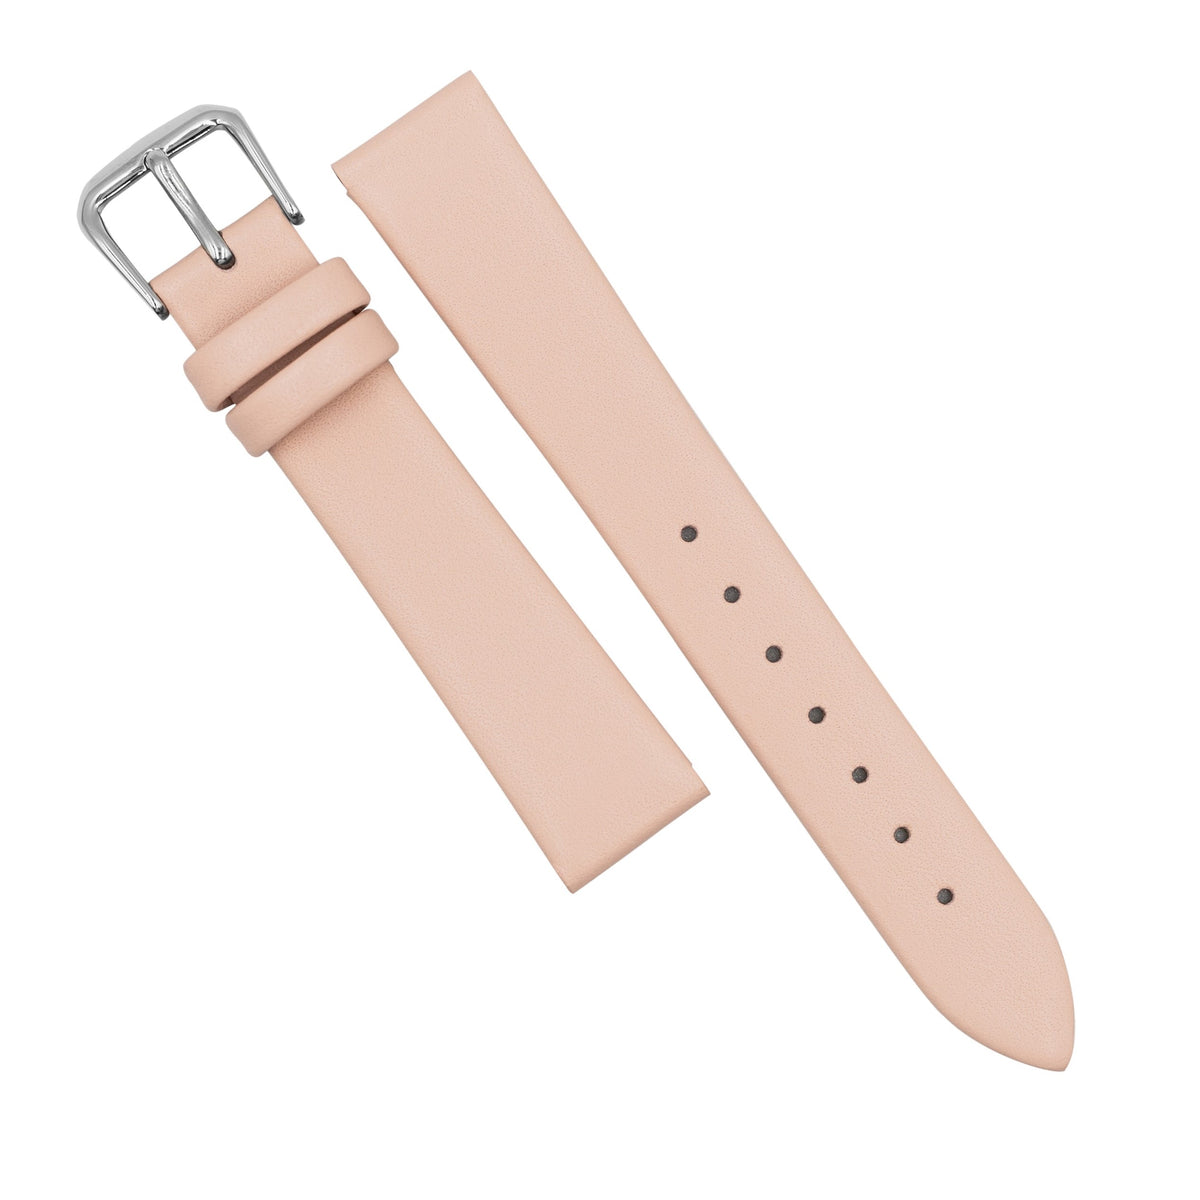 Unstitched Smooth Leather Watch Strap in Pink (12mm) - Nomad Watch Works SG